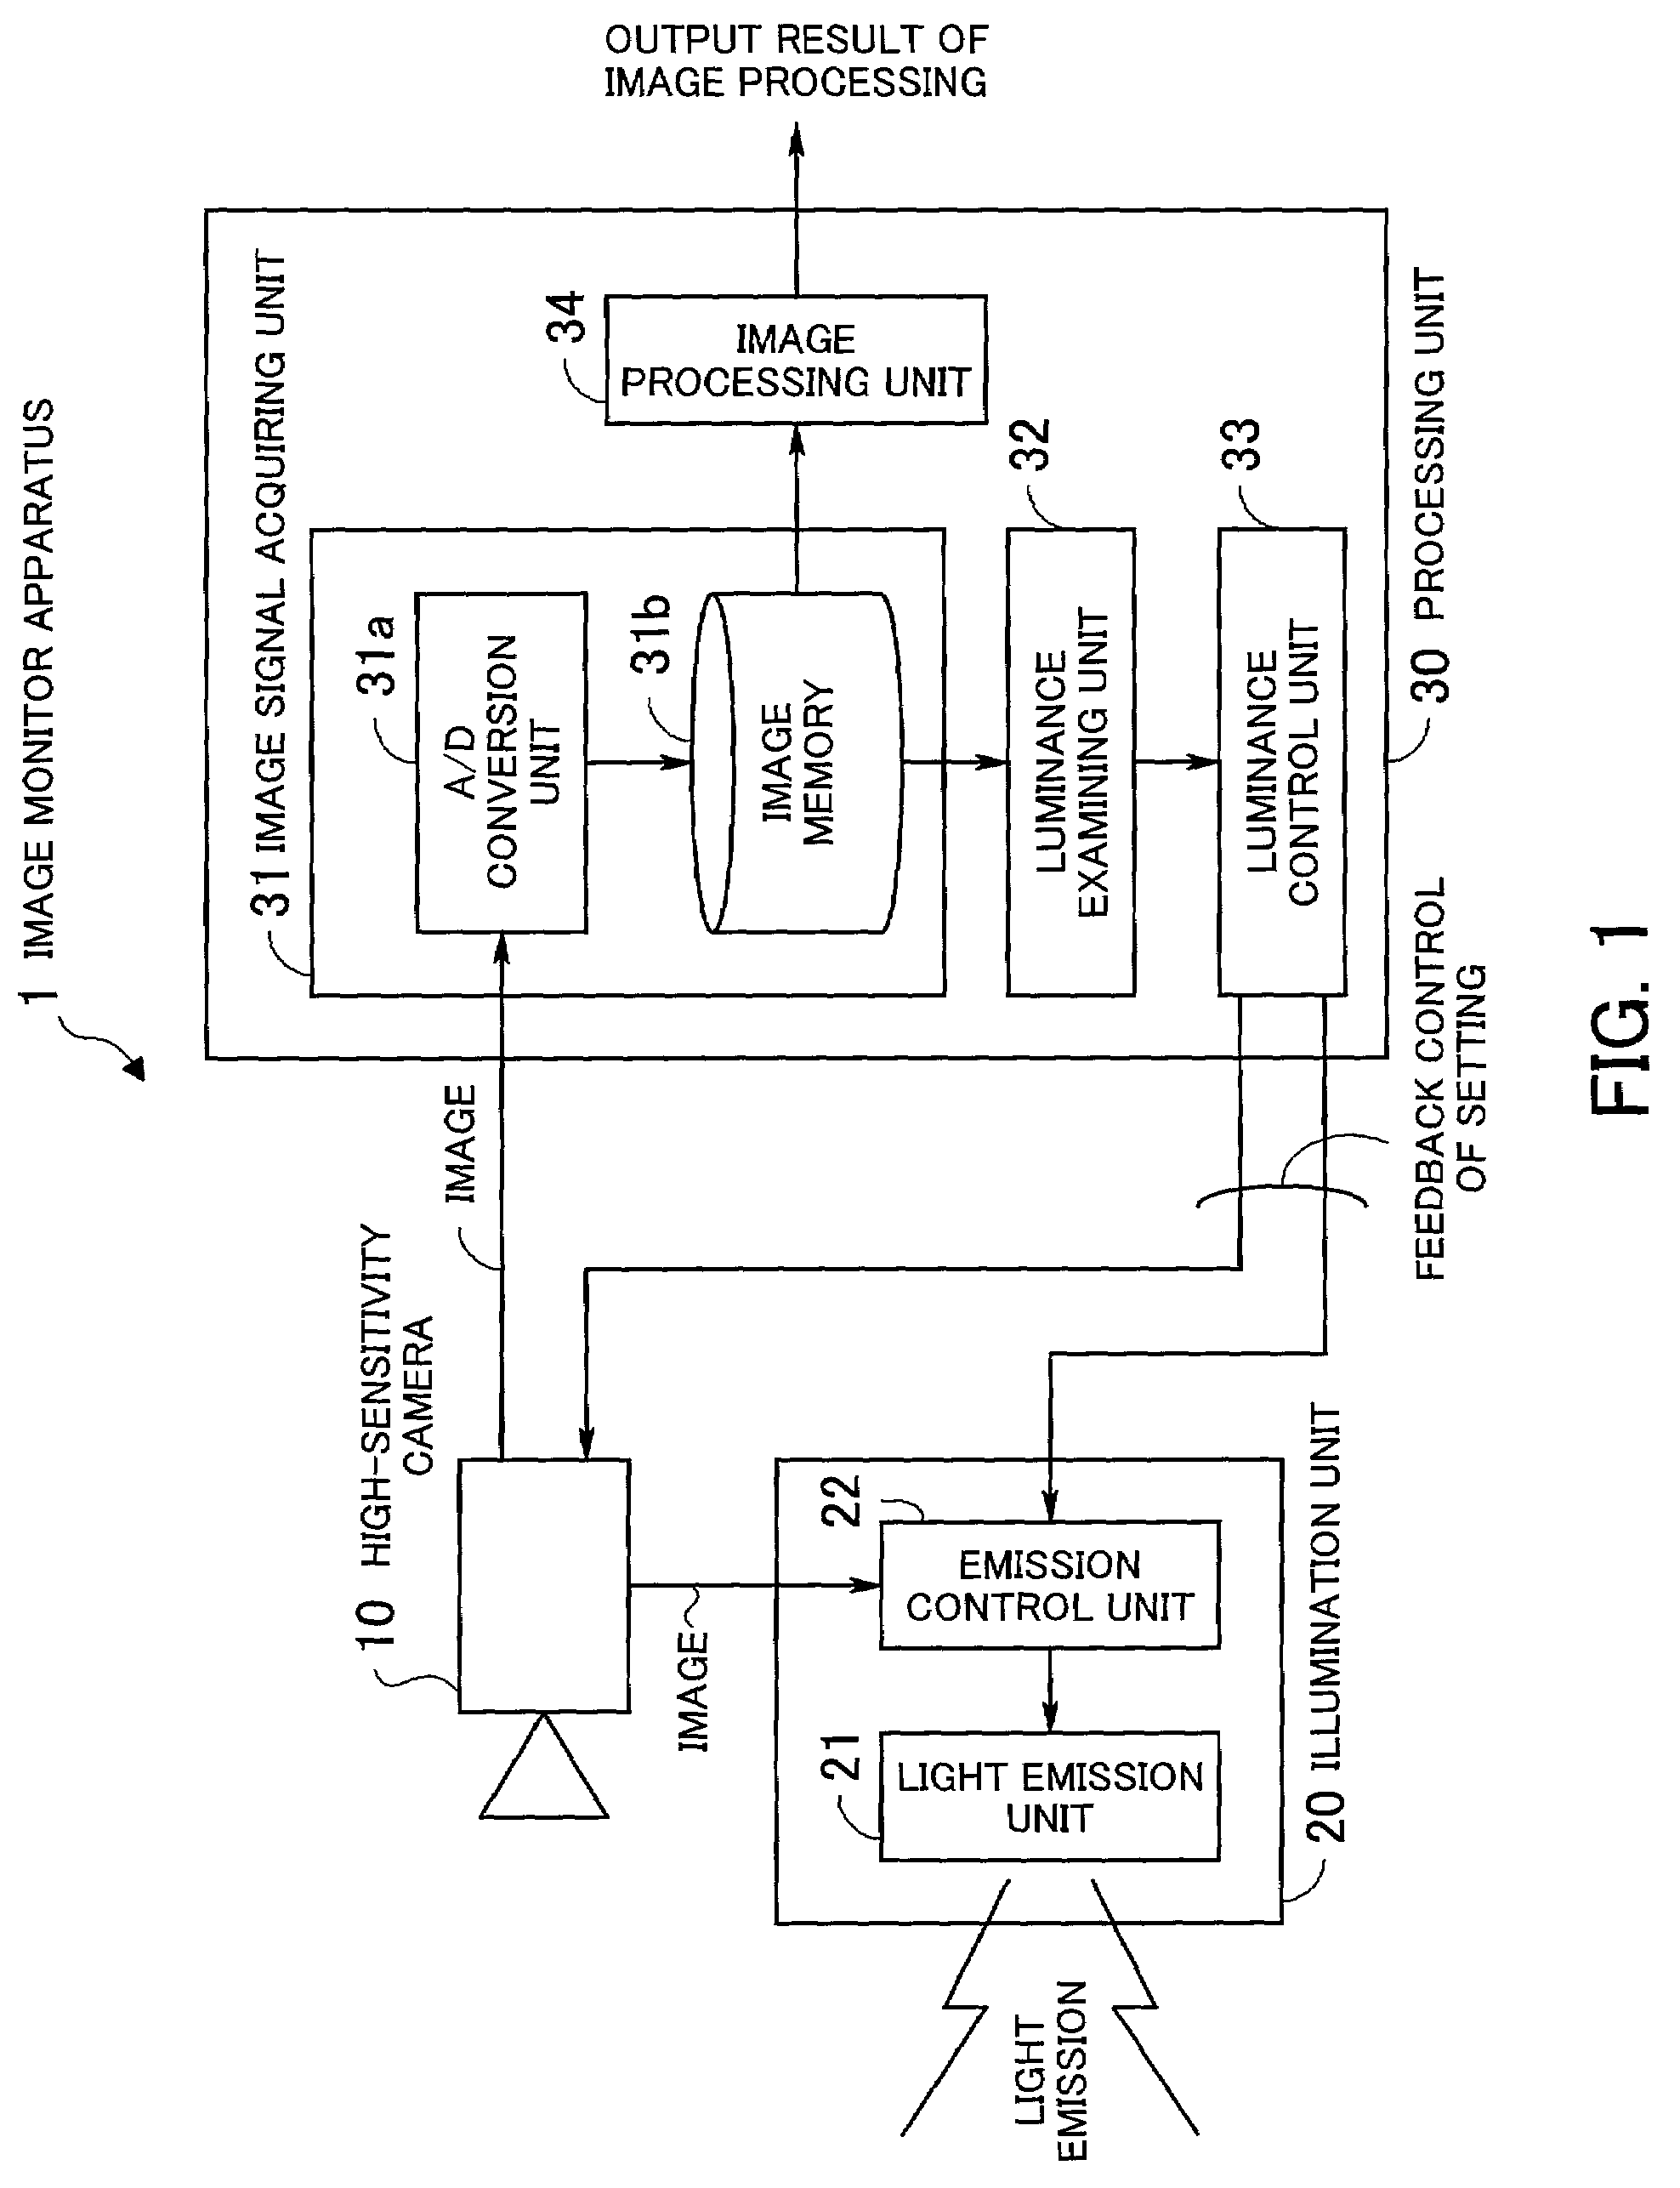 Image monitor apparatus controlling camera and illumination in order to optimize luminance of picked-up image